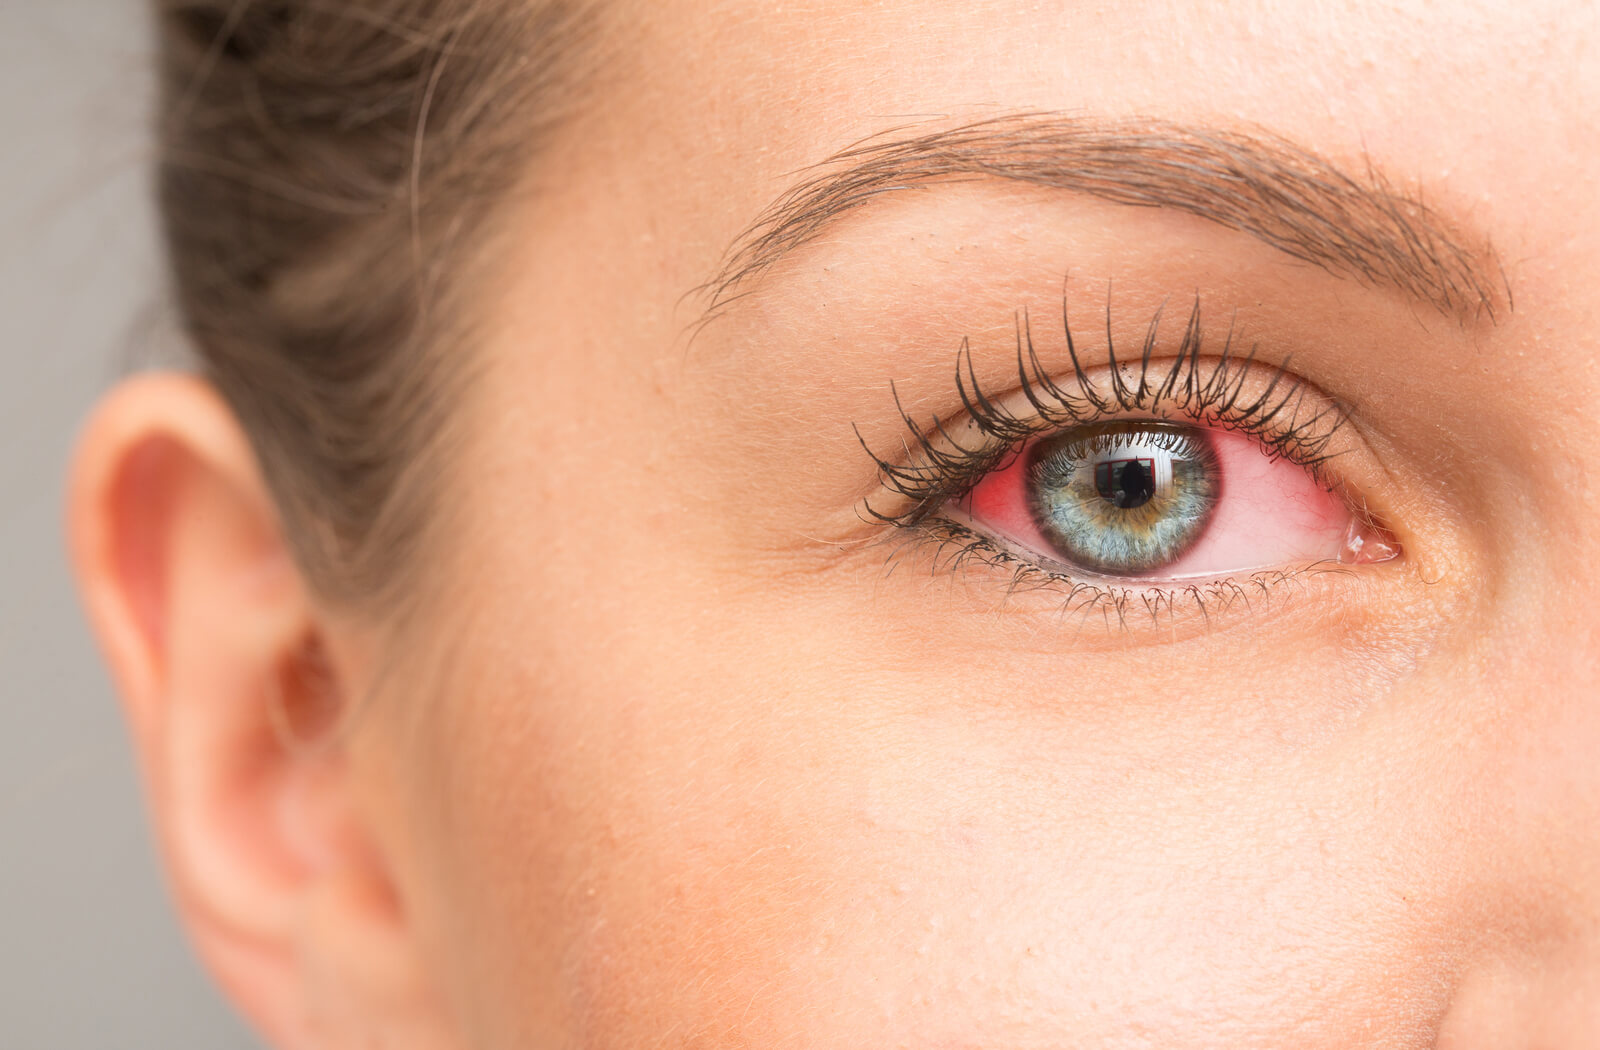 a close up image of a woman's eye which is red due to infection